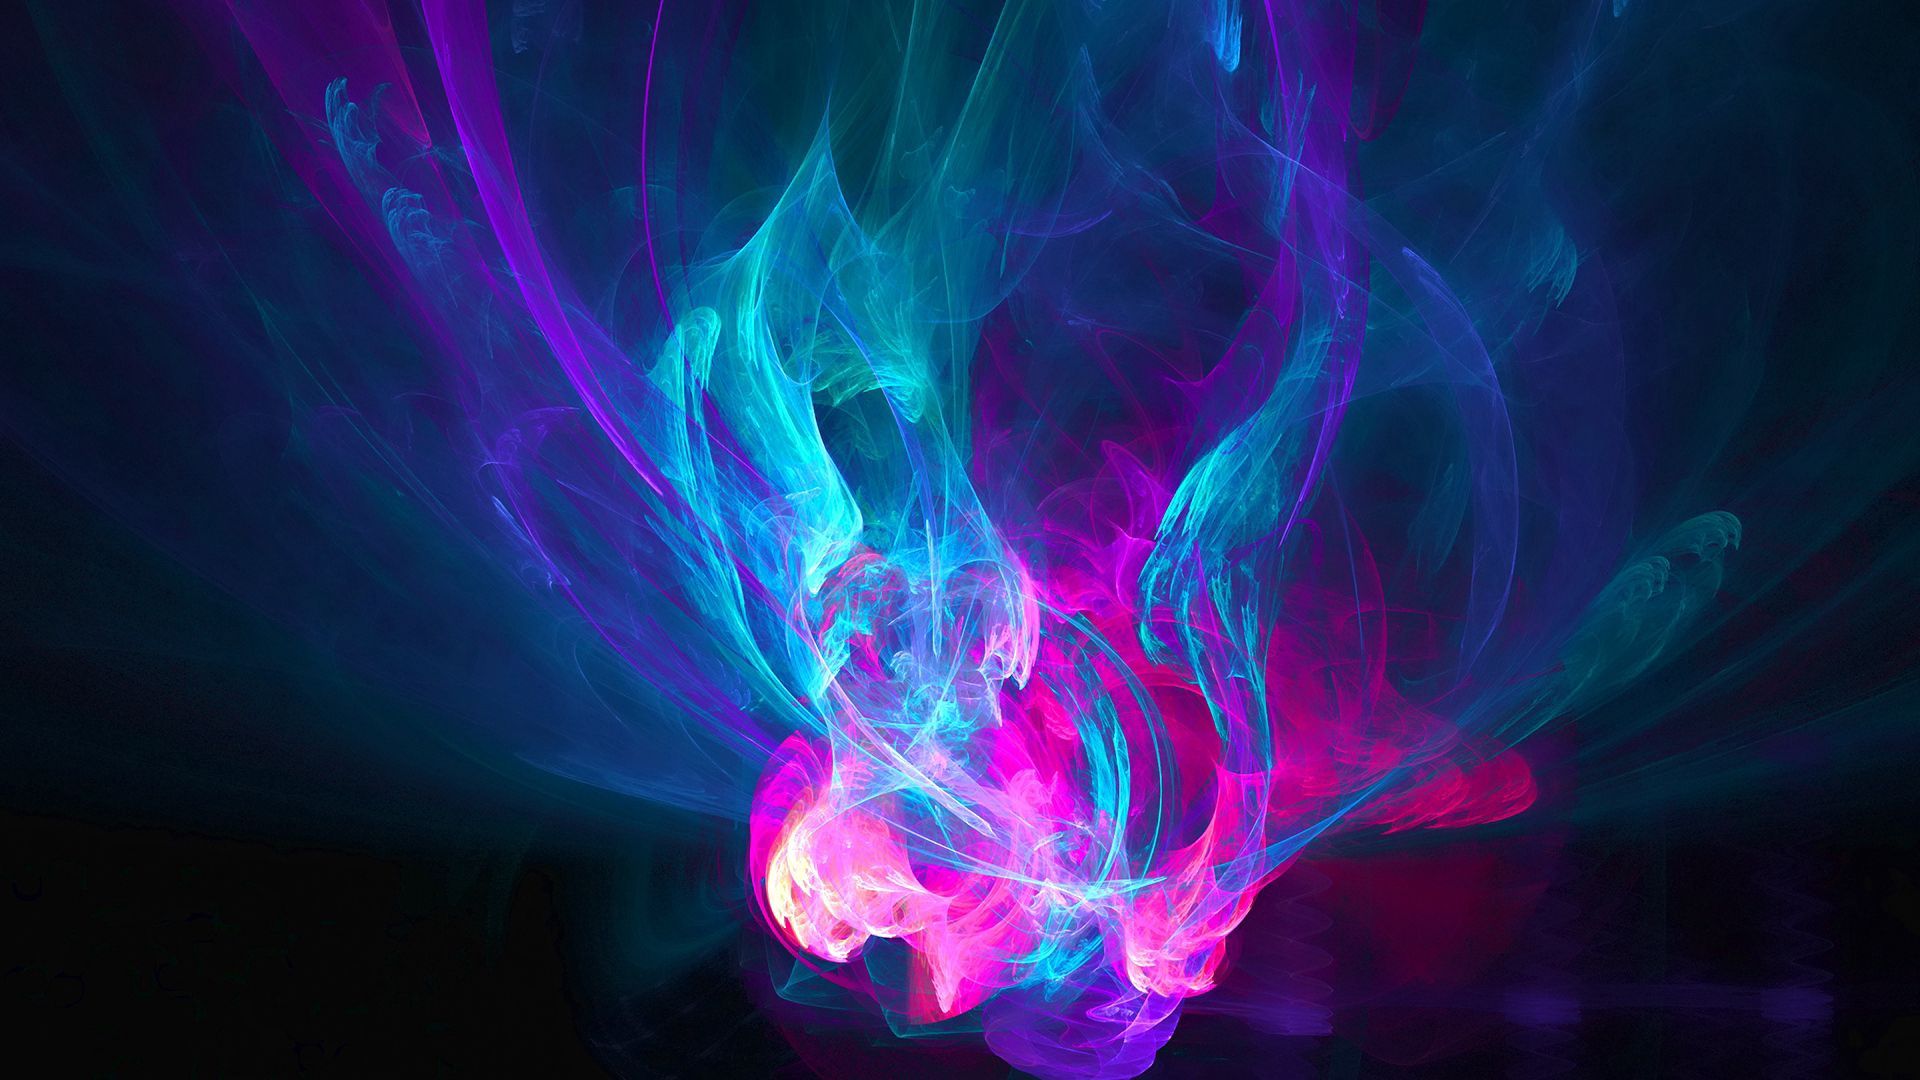 Download wallpaper 1920x1080 abstraction, light, pink, blue, purple, patterns HD background